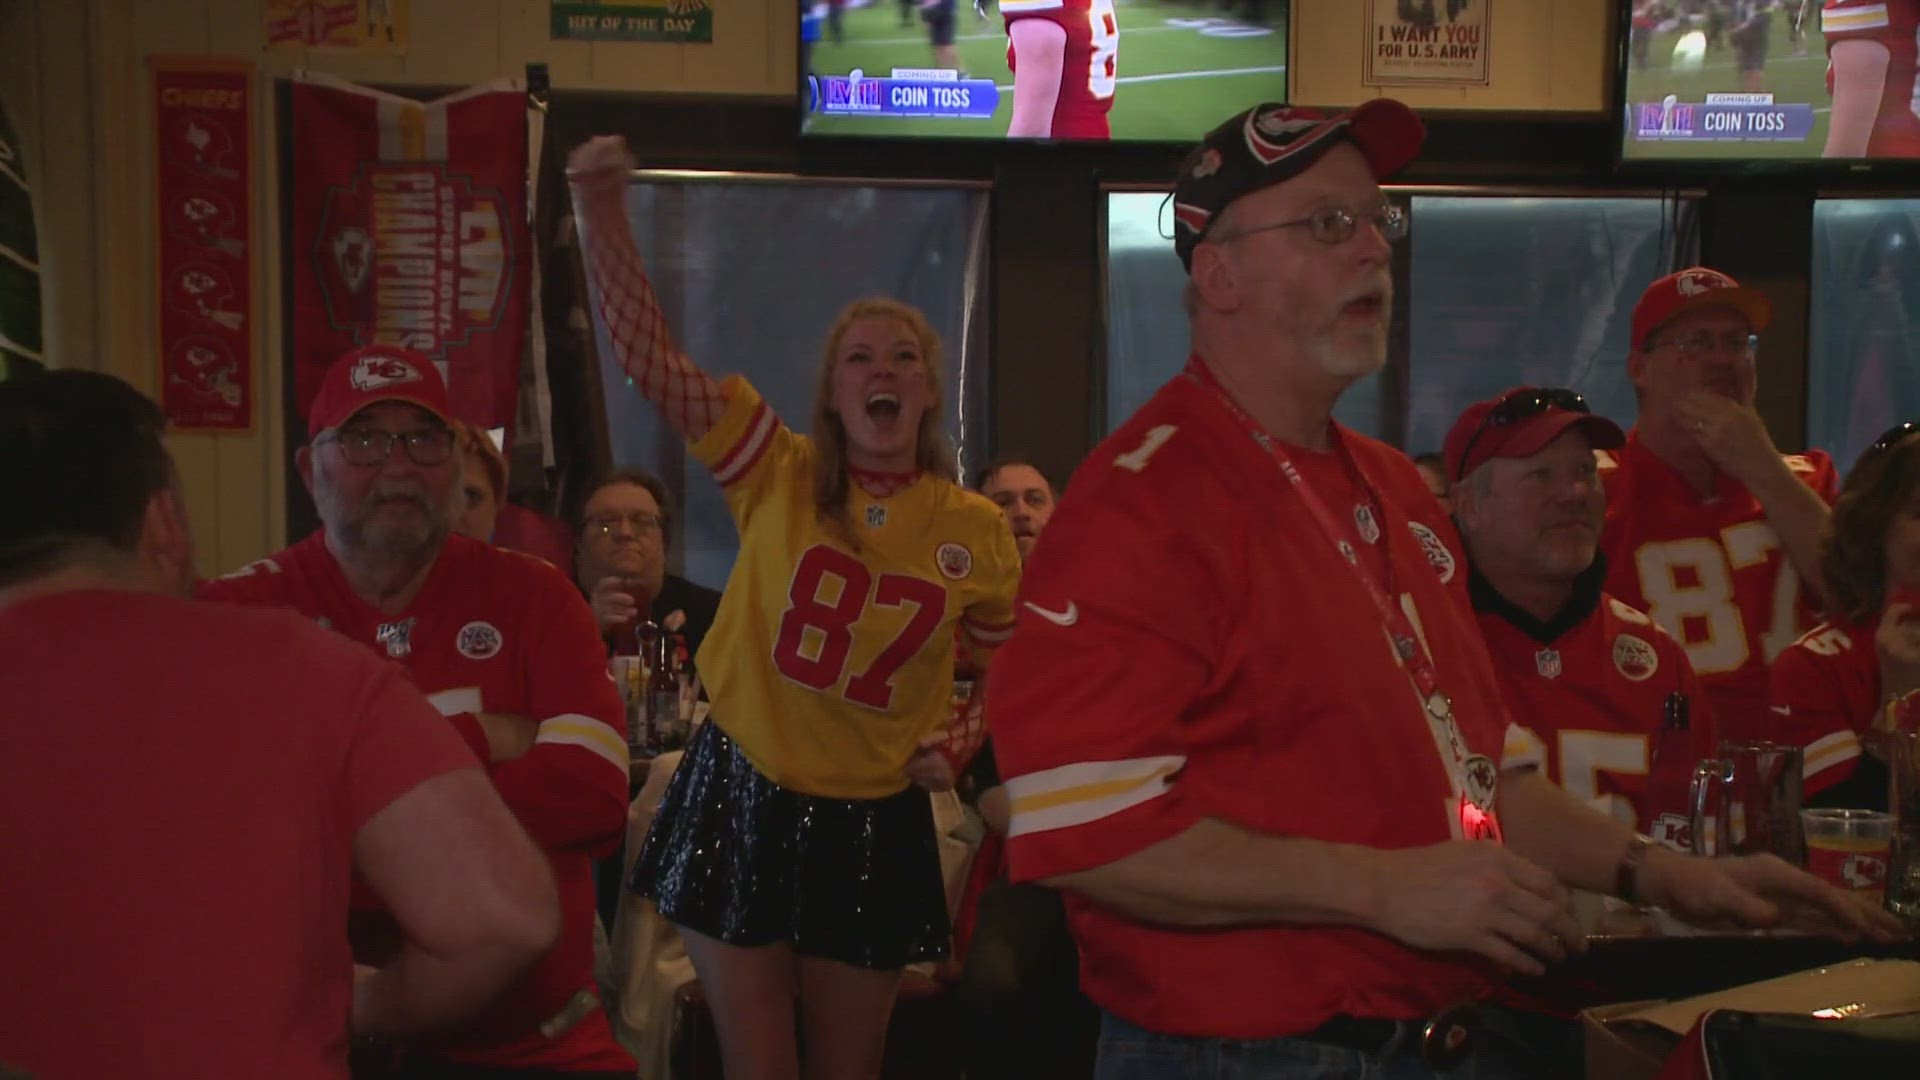 It was rare to see 49ers fans in St. Louis. The Chiefs had the last laugh as back-to-back champions.